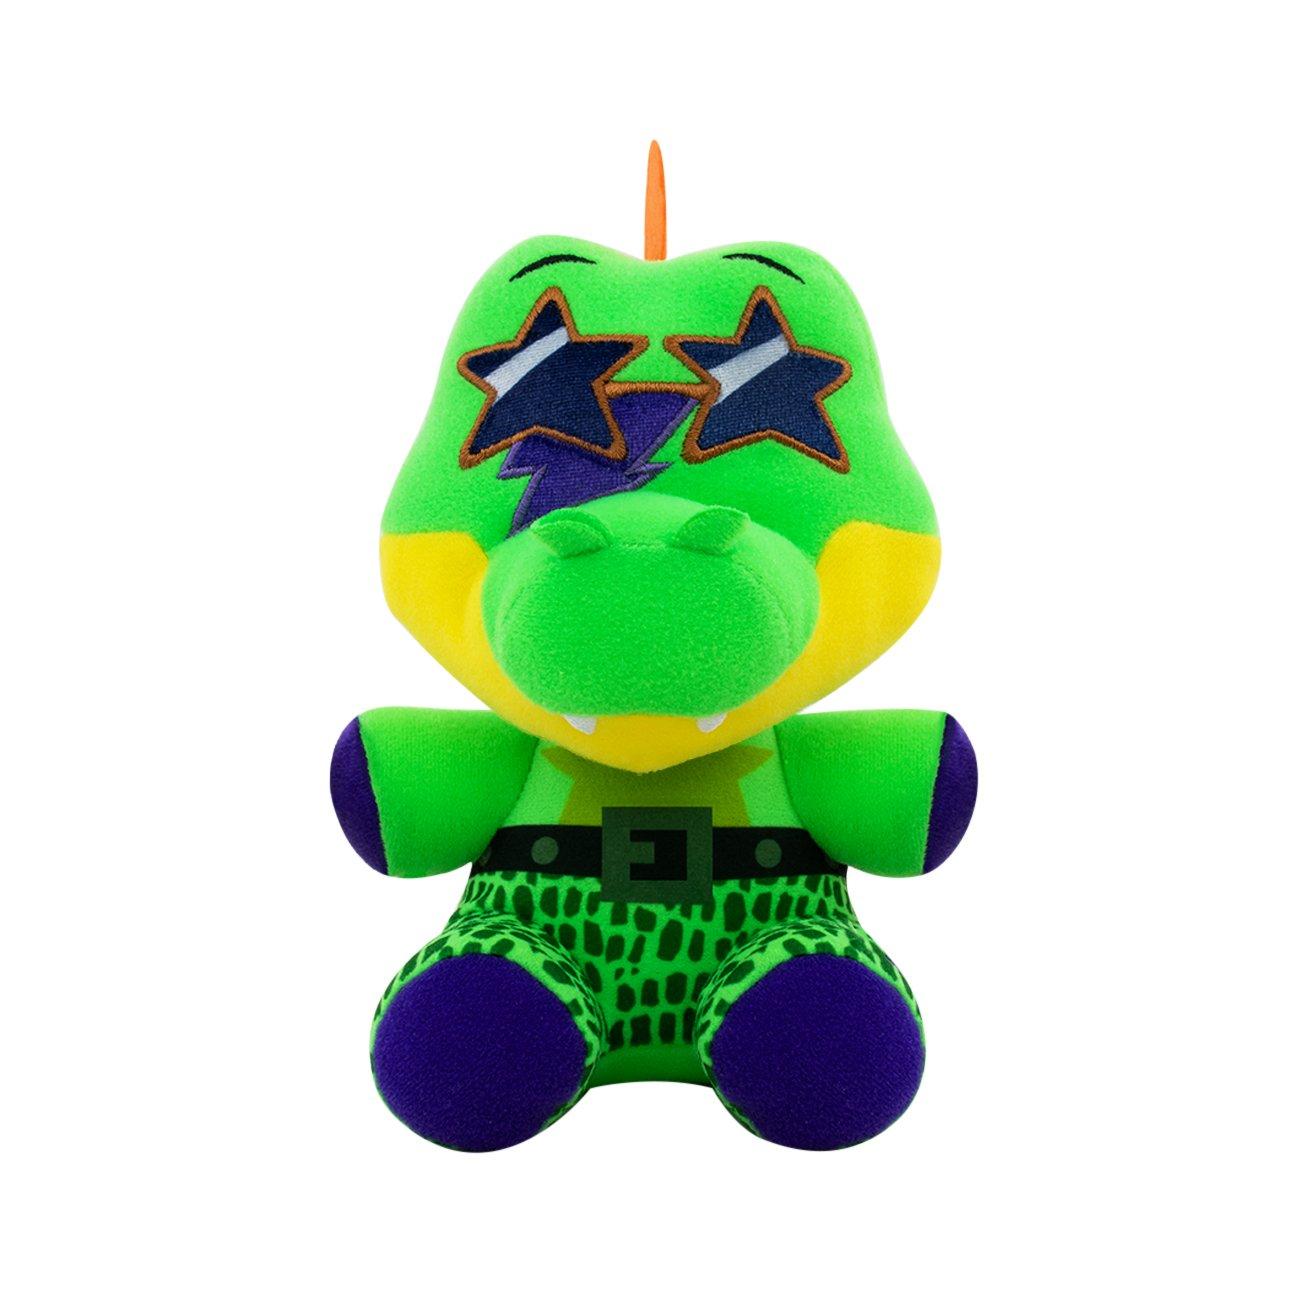 Funko Five Nights at Freddy's Security Breach Plush (Styles May Vary)